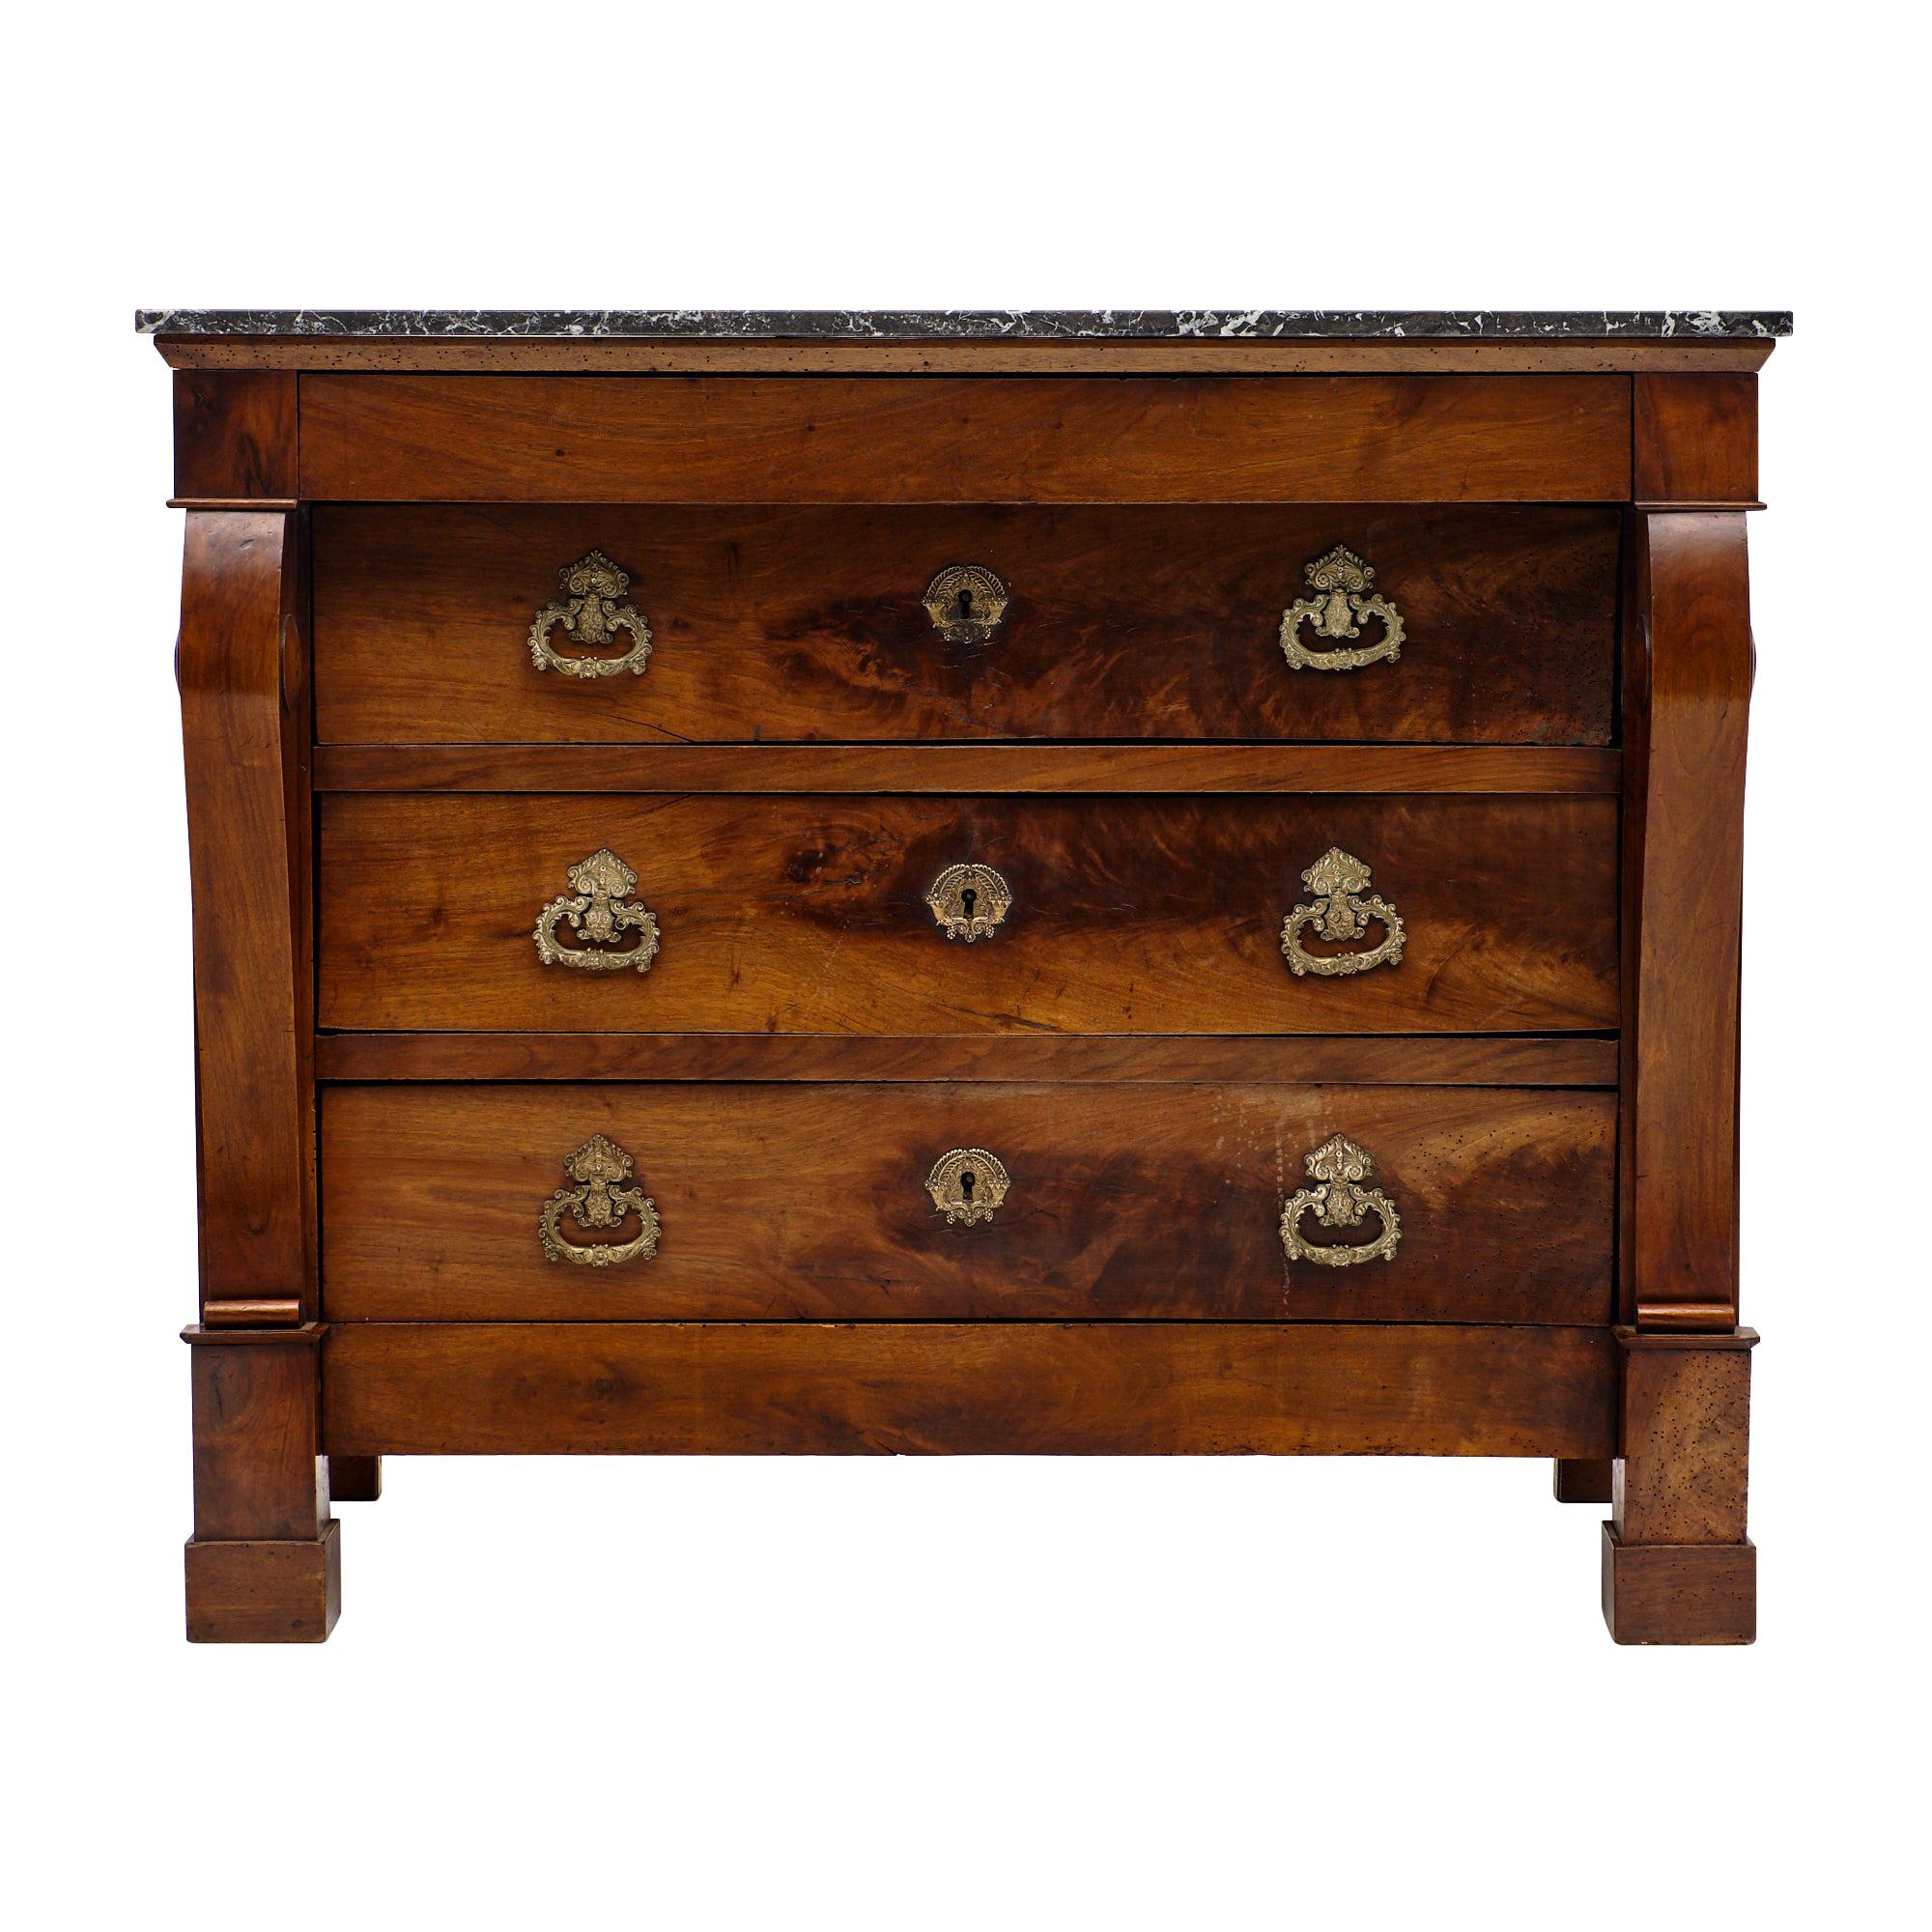 Restauration Period French Walnut Chest of Drawers